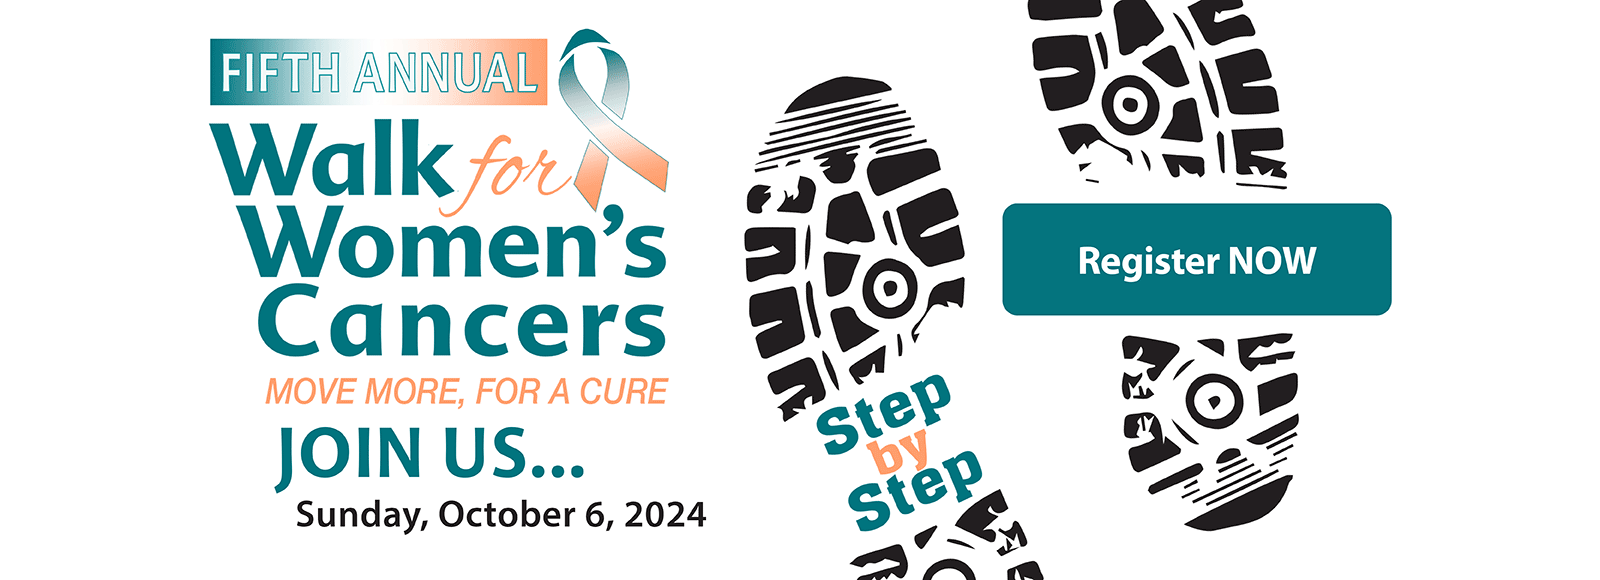 Fourth Annual Walk for Women's Cancers